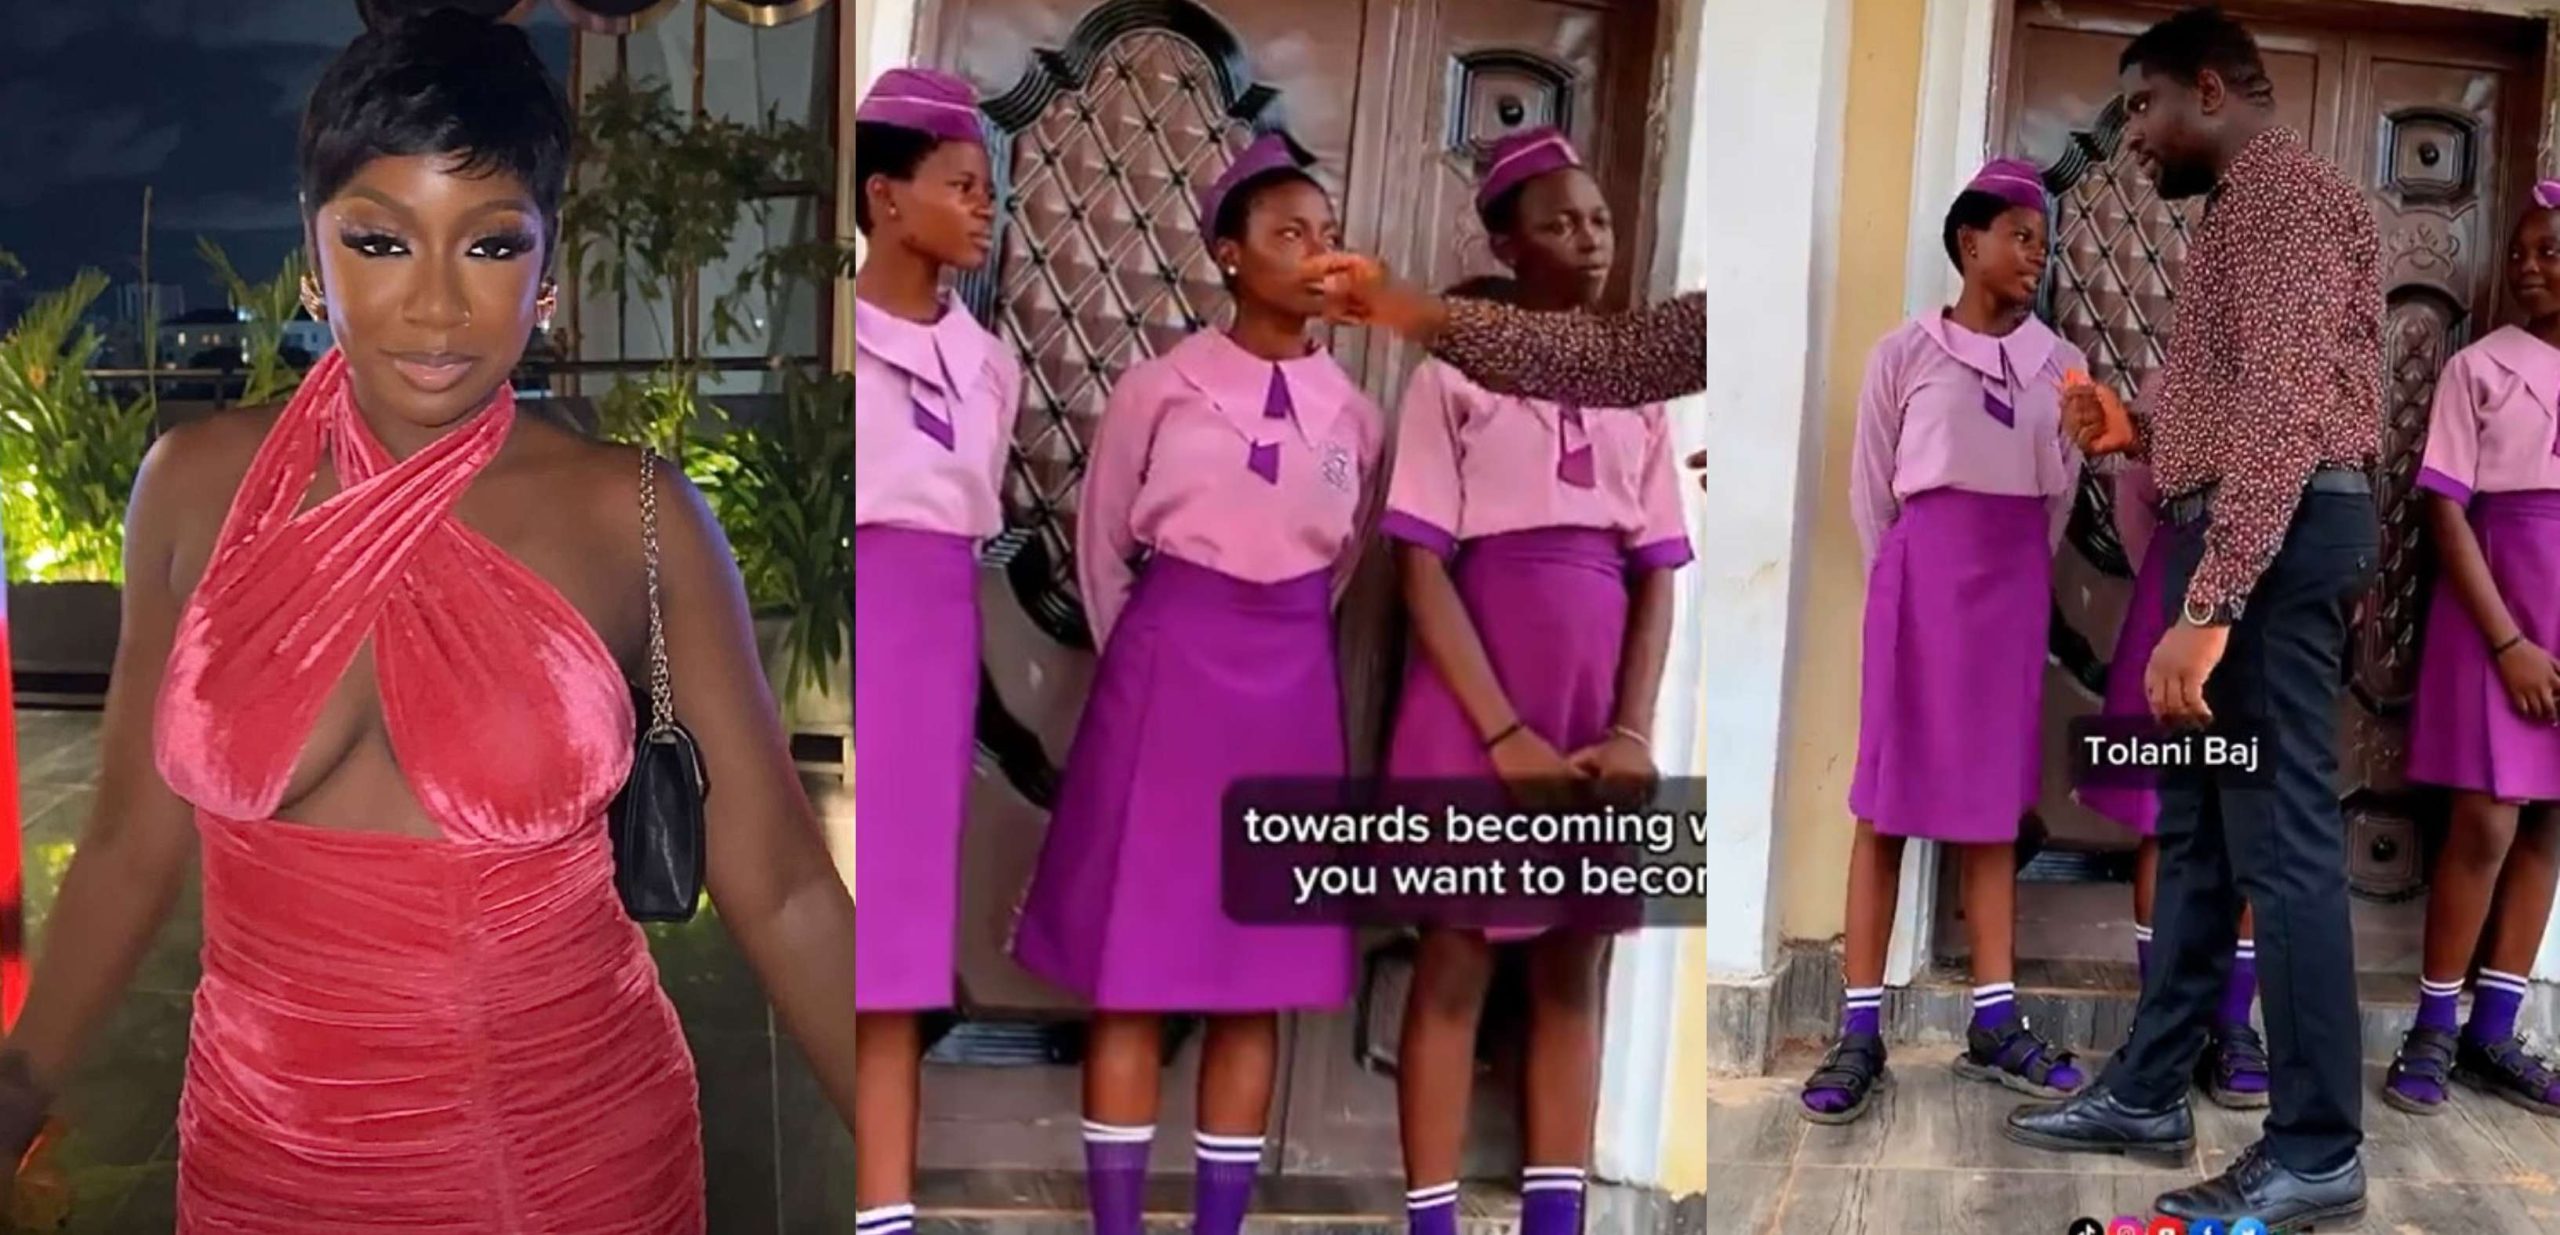 Secondary school girl causes stir as she names Tolanibaj as her role model